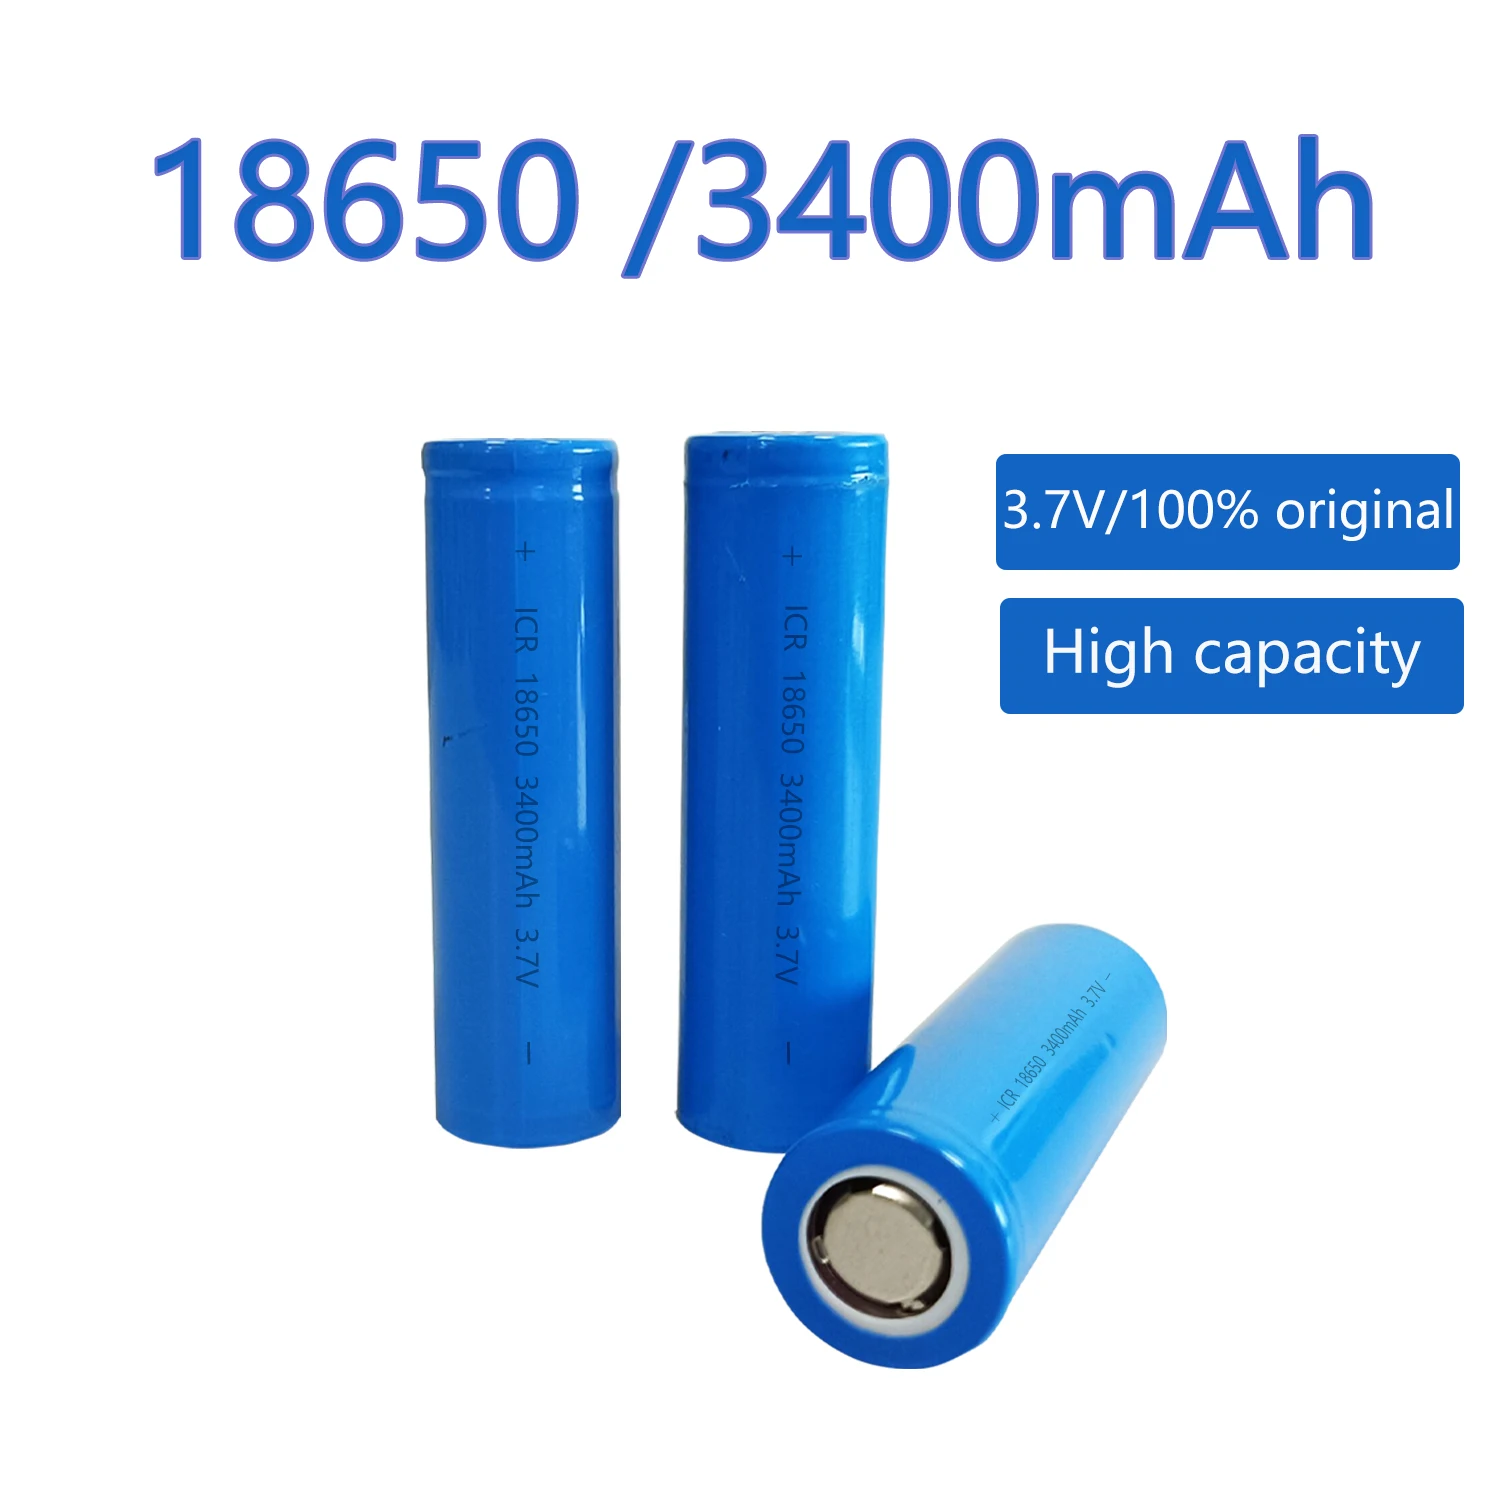 

Rechargeable Lithium Battery 3.7v 3400mah 18650 Batteries Cells For Digital Appliance Laptop Radio Fans Power Bank